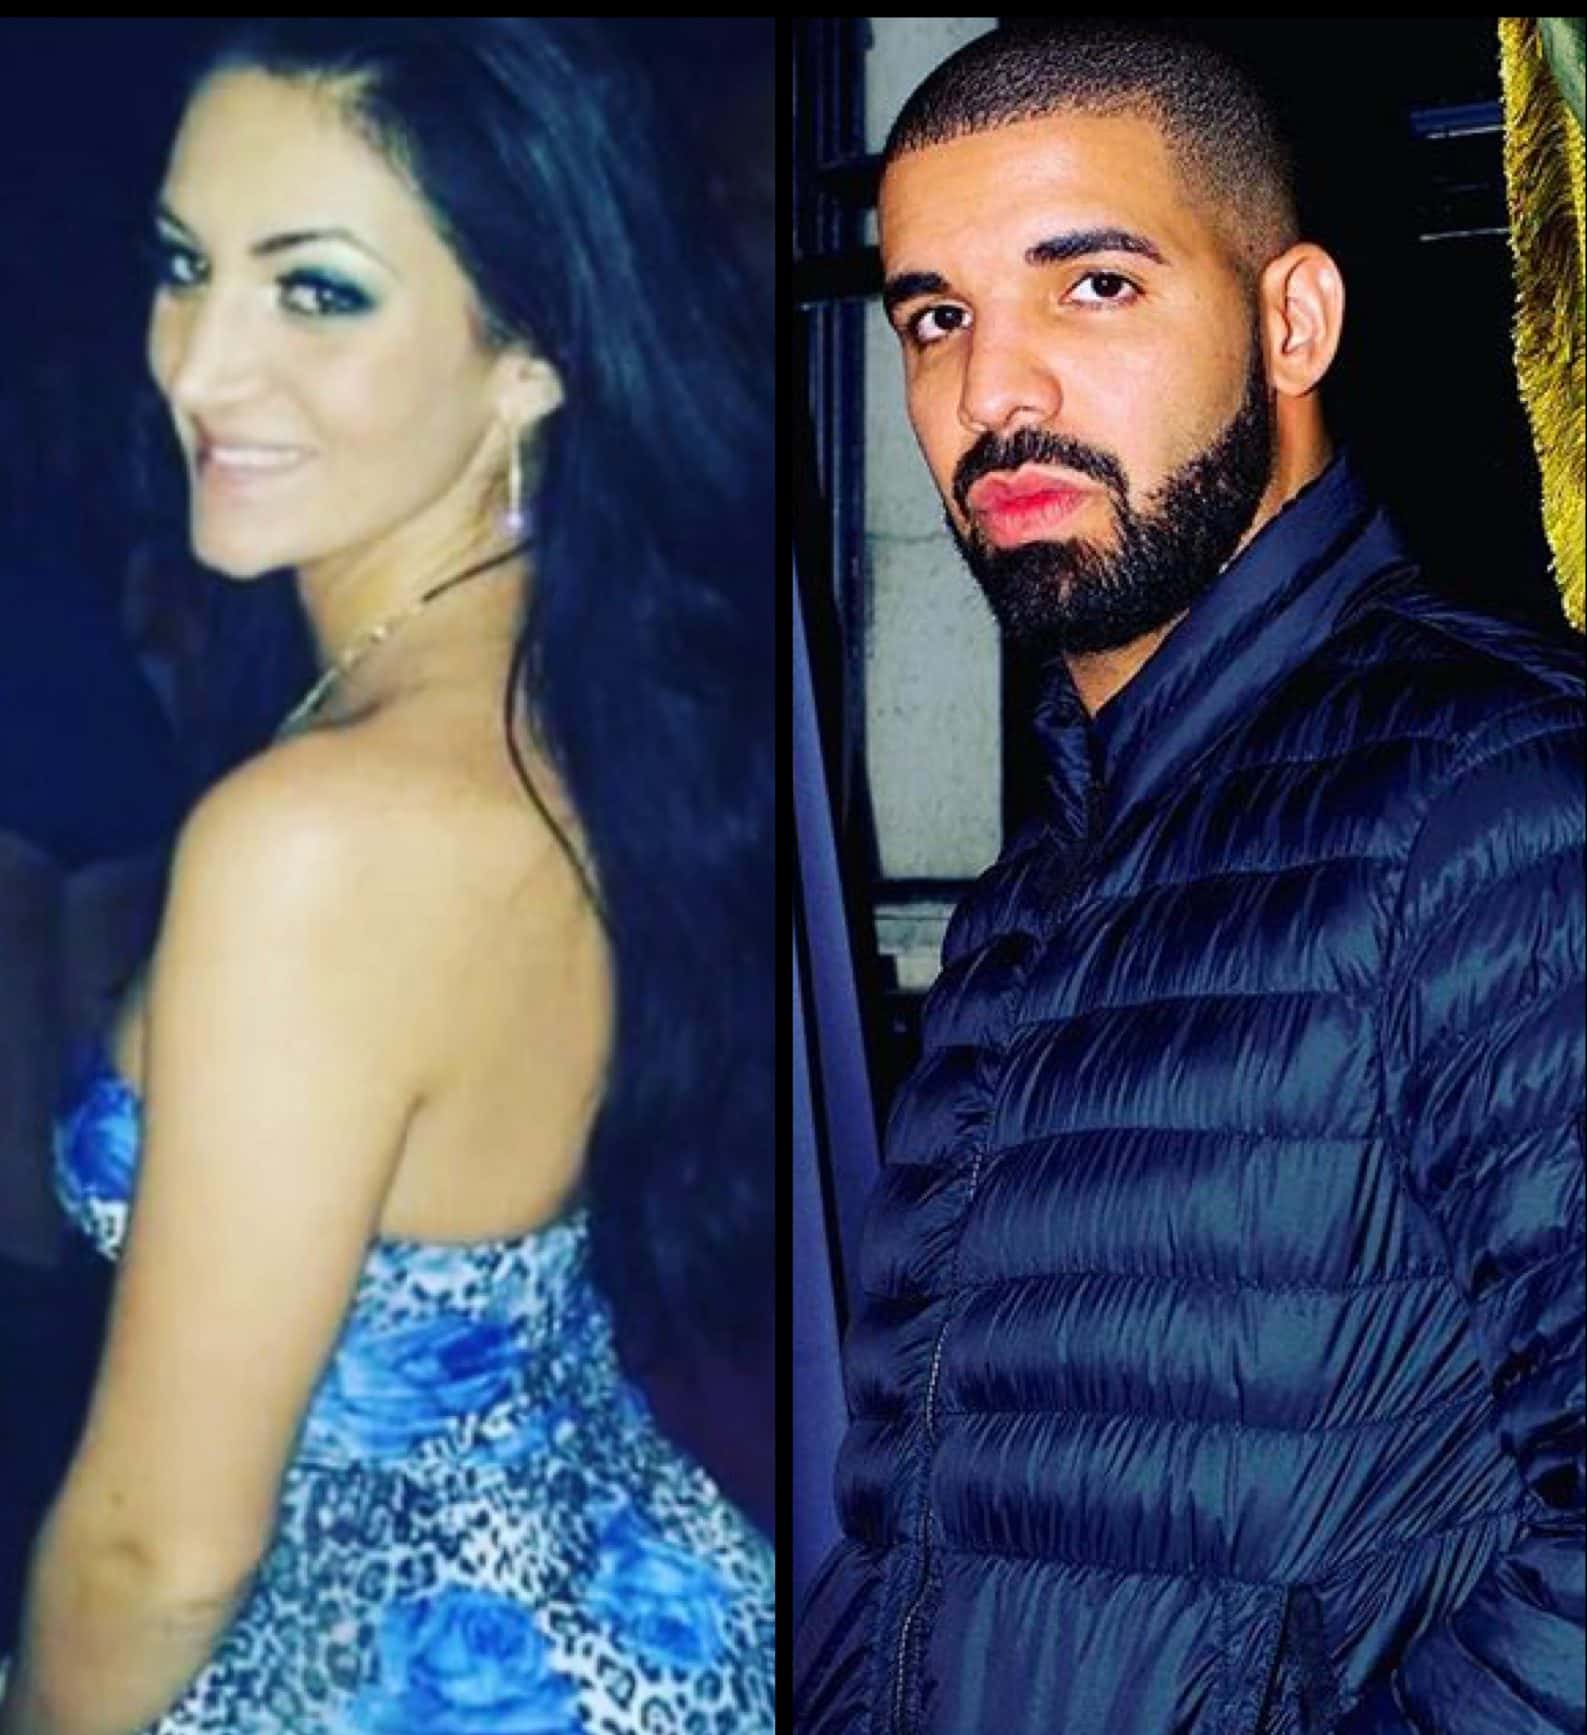 Girl Porn Star Thug Life - Drake Is Reportedly The Father of Ex-Porn Star's Unborn ...